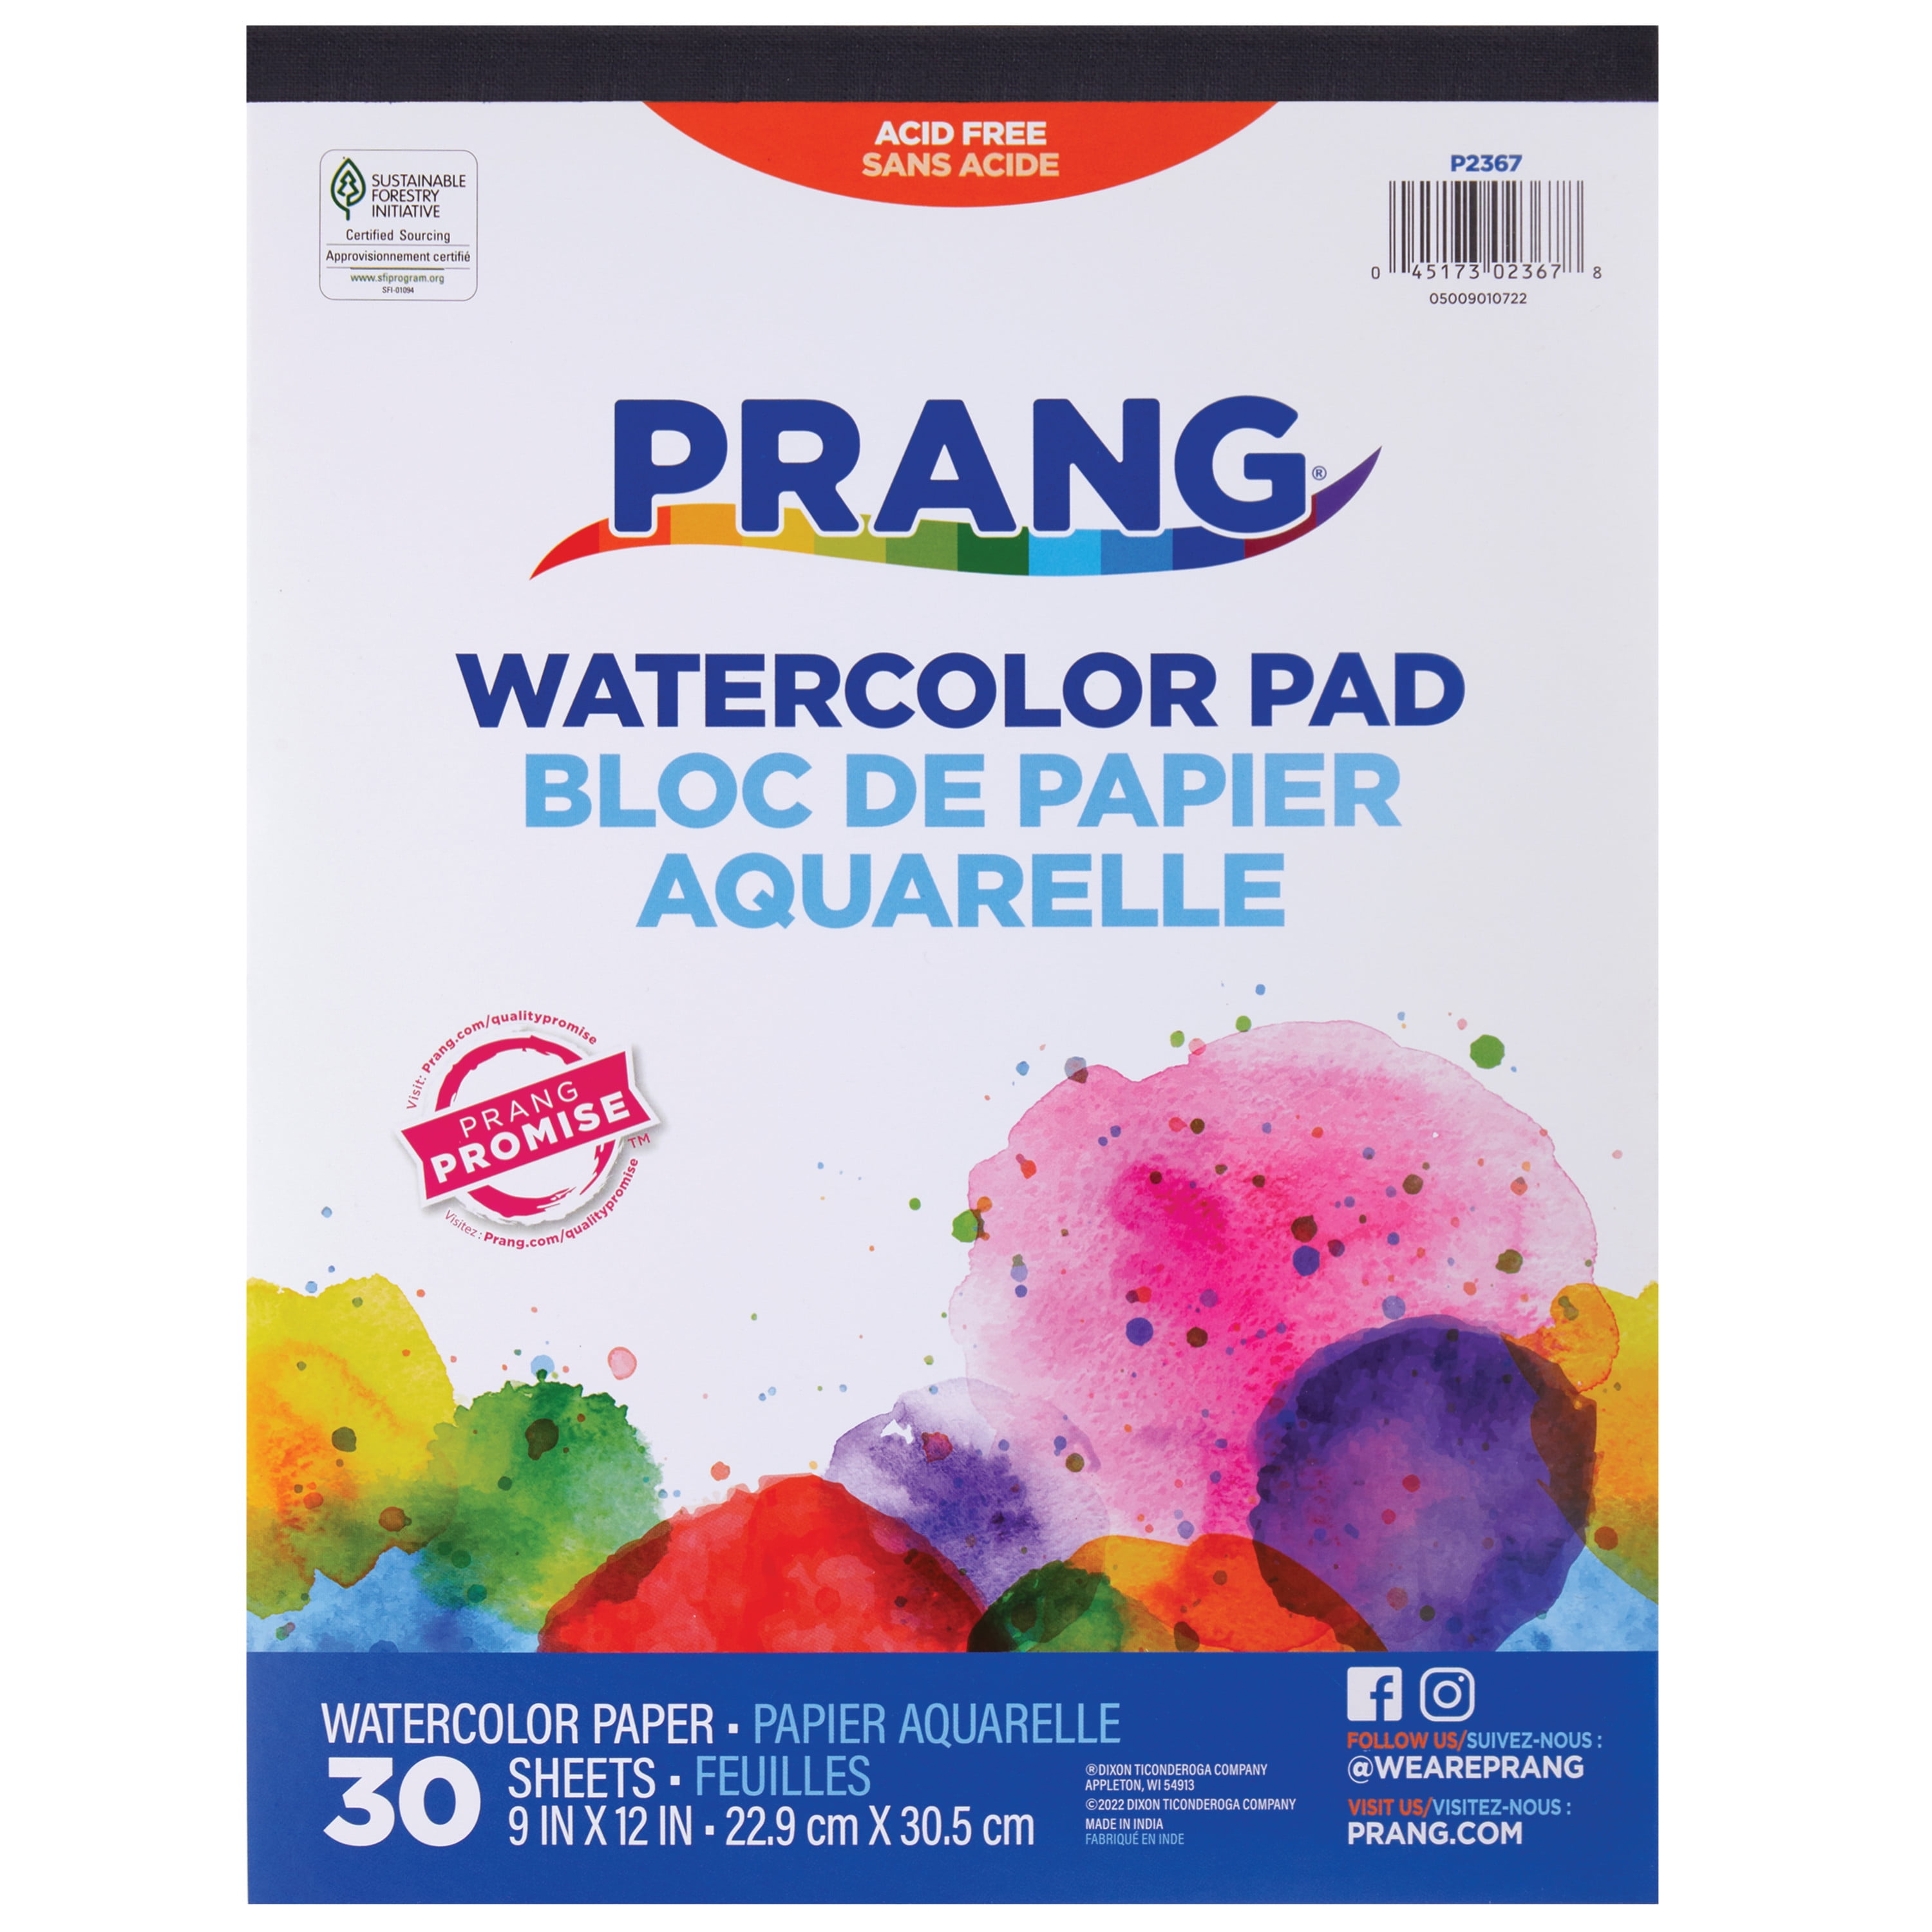 Mixed Media Paper Pad For Paints And Watercolors, Acid Free, 60 Sheets